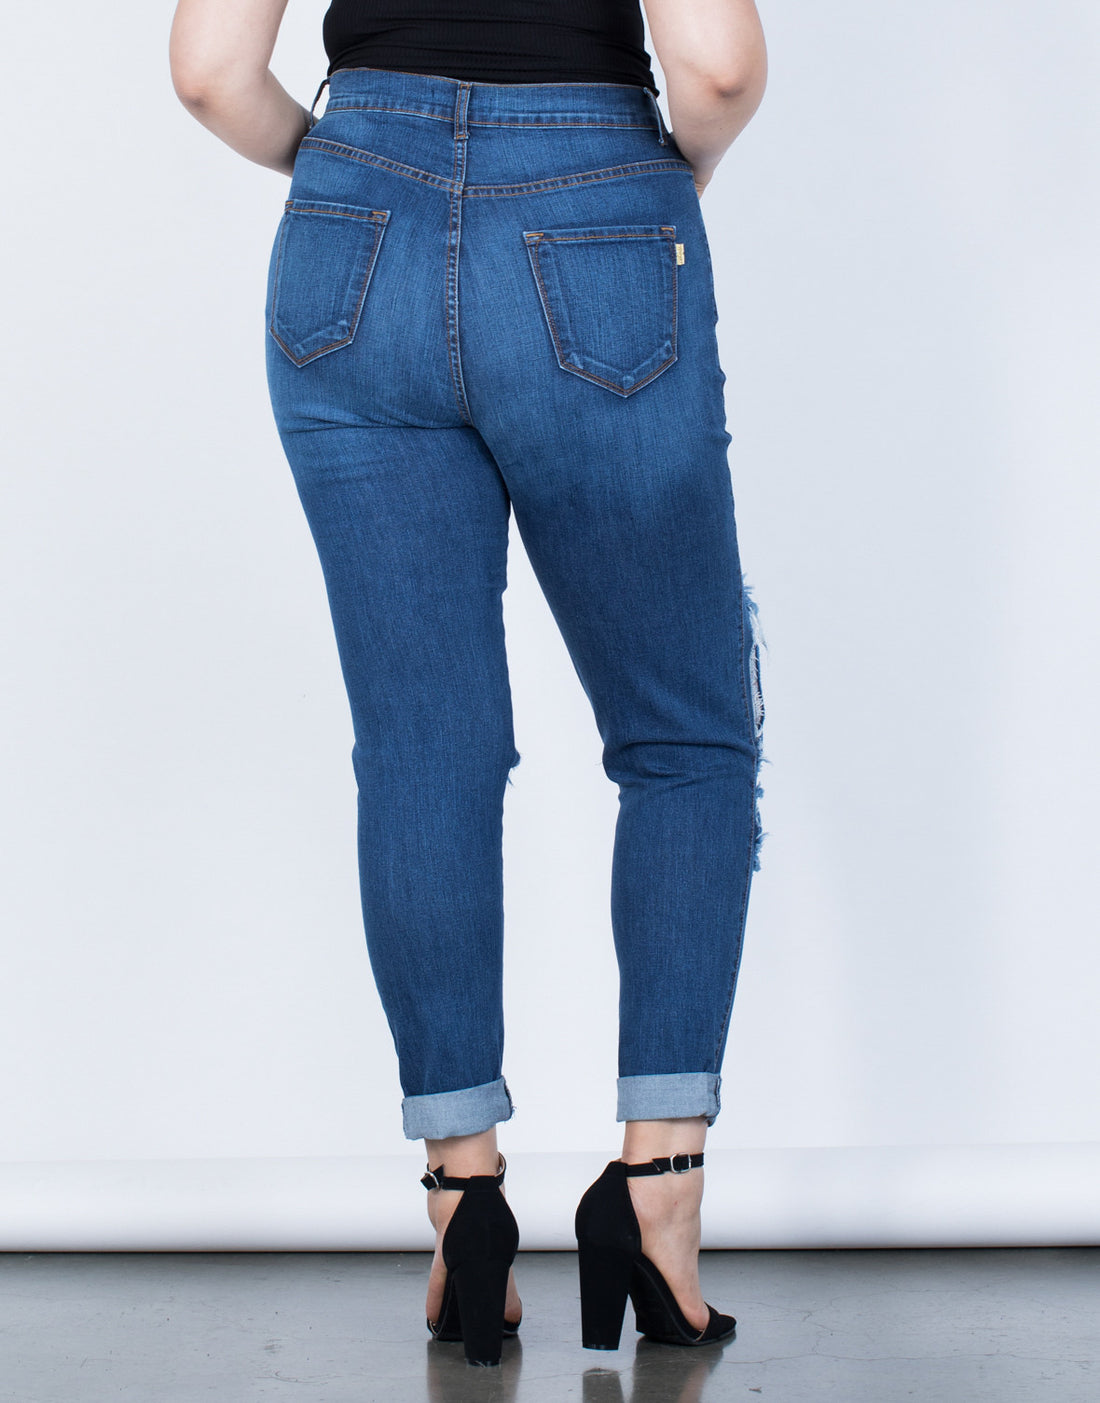 Curve High Waisted Cuffed Denim Jeans Plus Size Bottoms -2020AVE